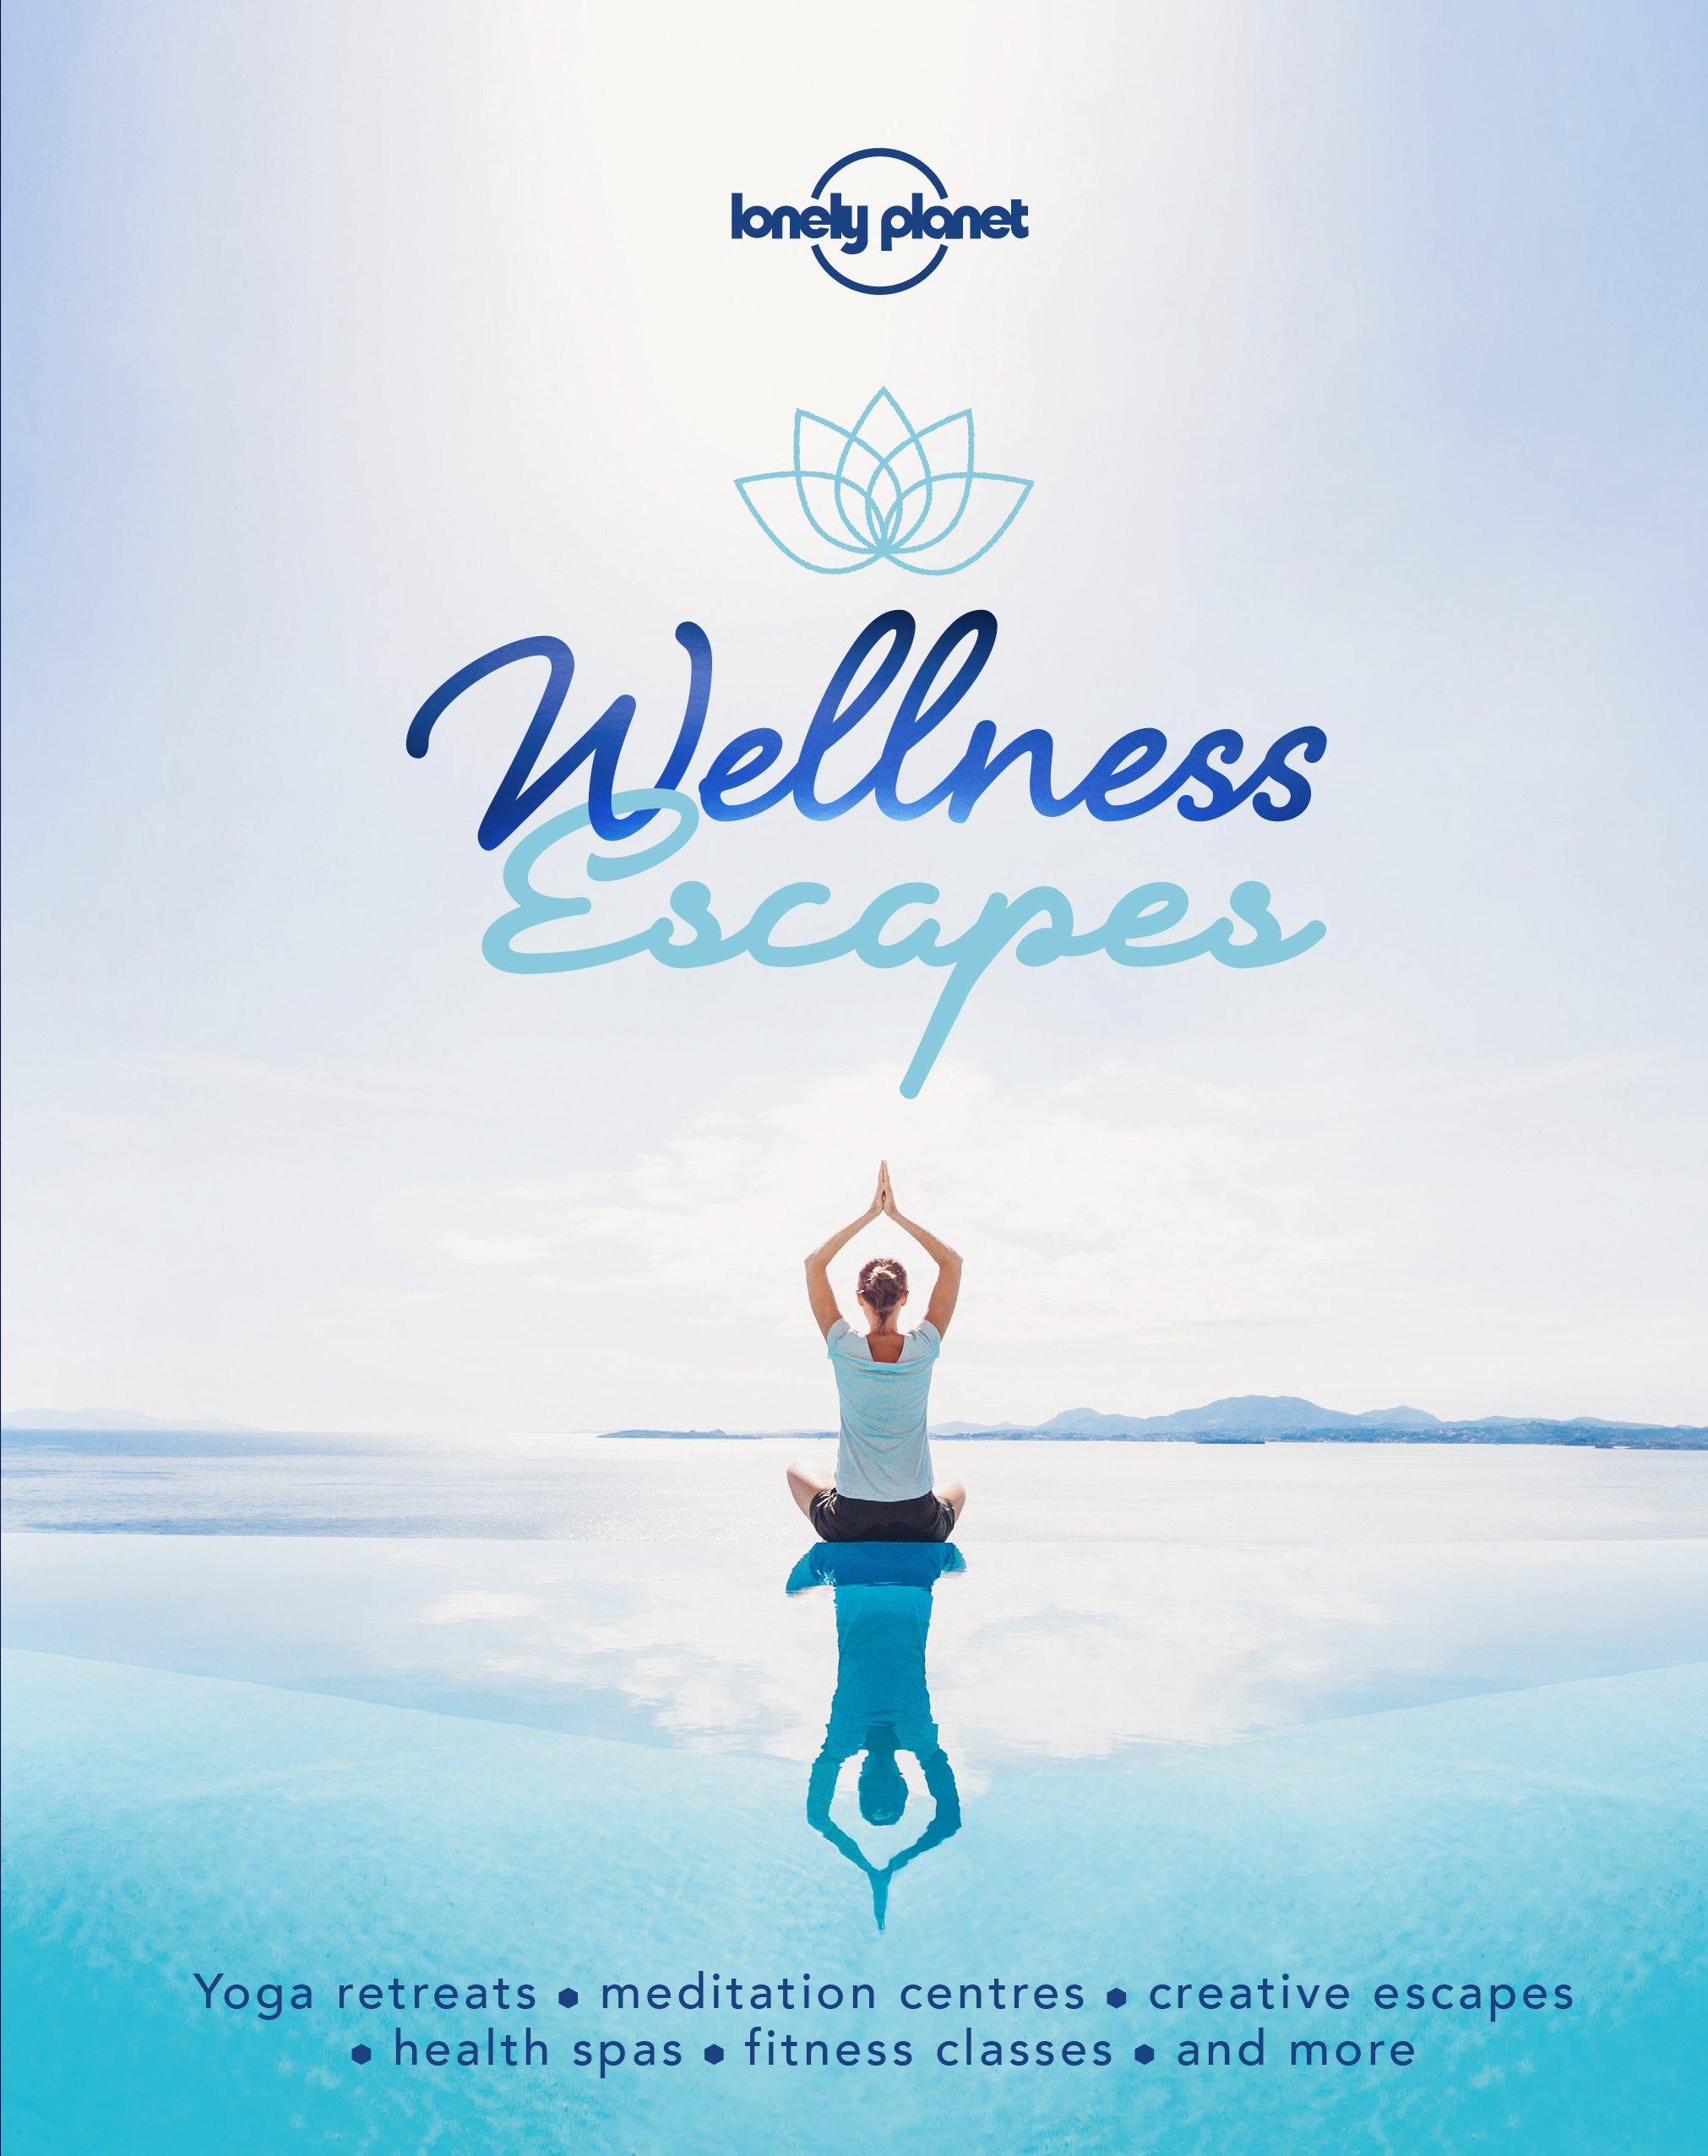 Wellness Escapes - Lonely Planets guide to creative travel and wellbeing holidays